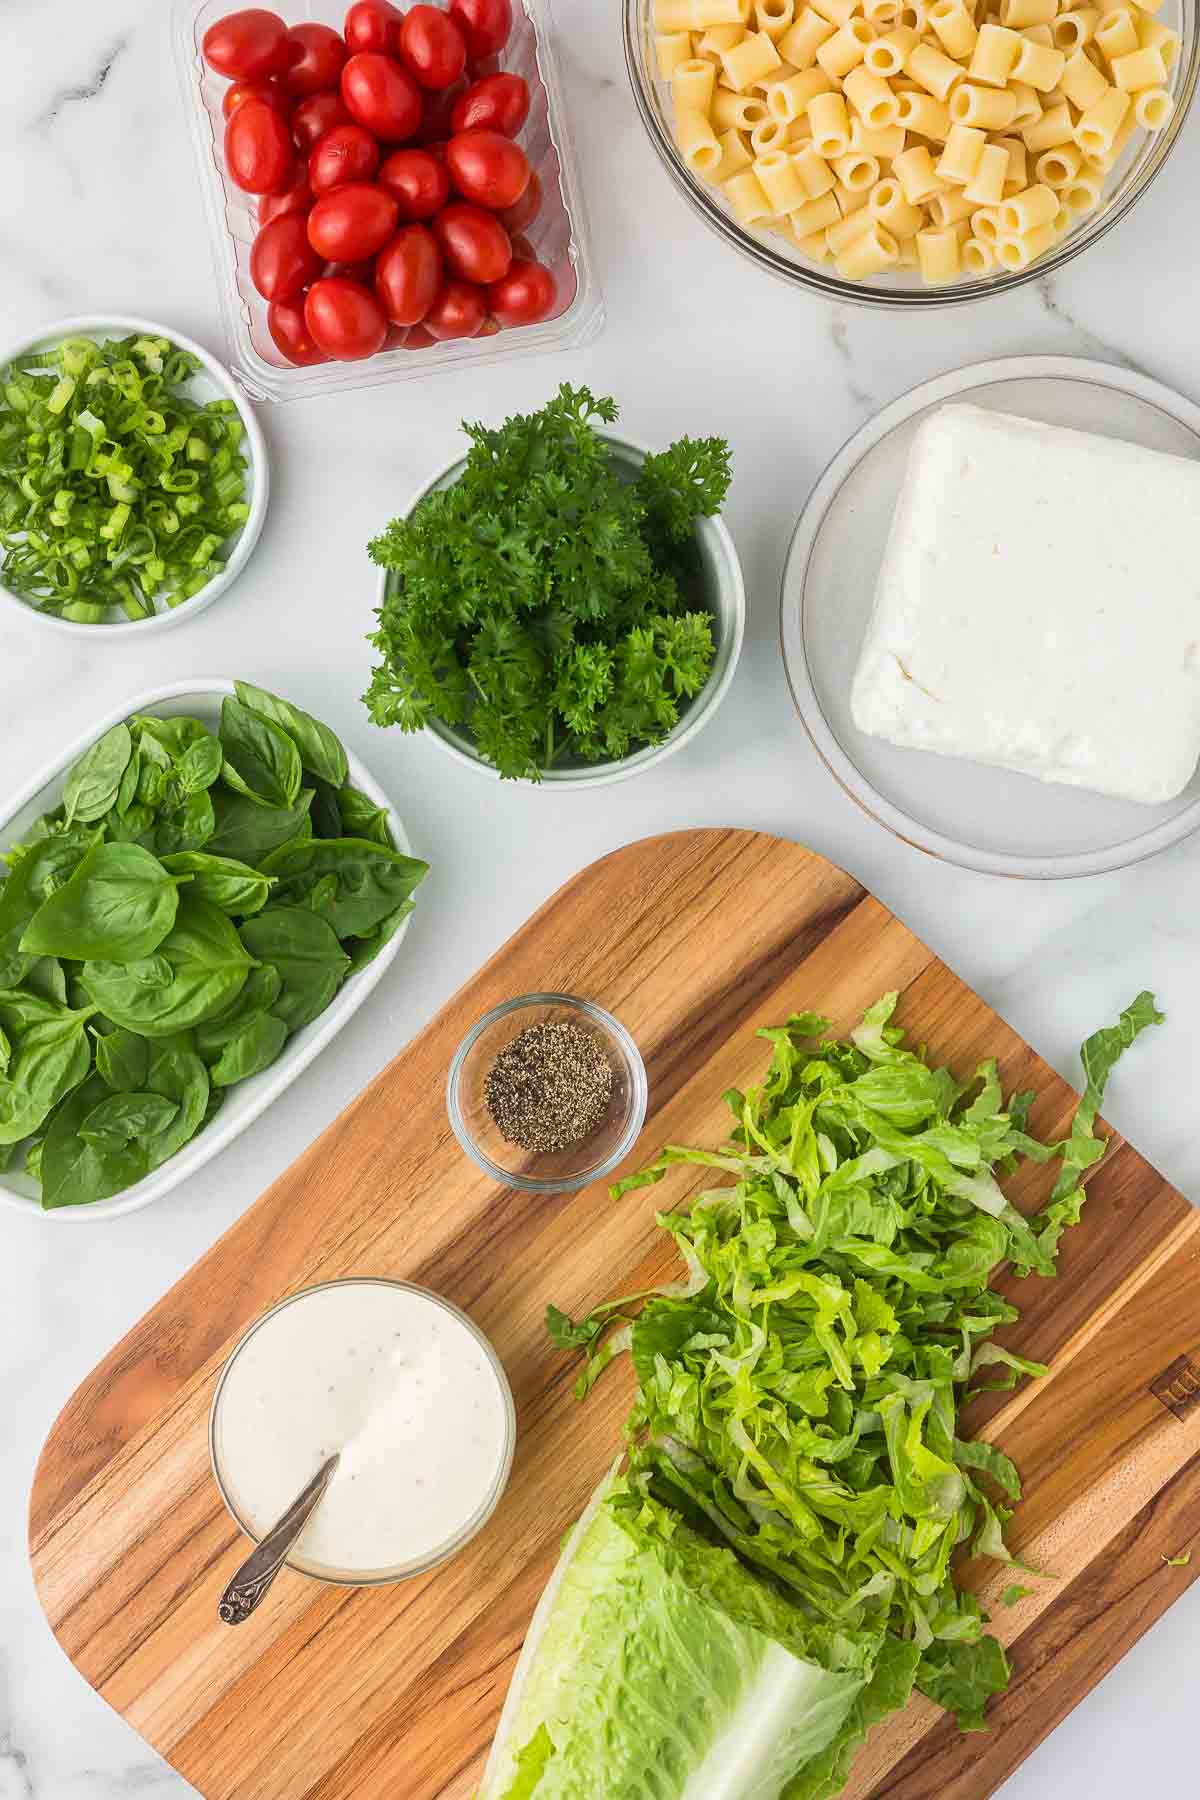 Ingredients to make caesar pasta salad including feta cheese, pasta, fresh basil and parsley, green onions lettuce and Caesar dressing.